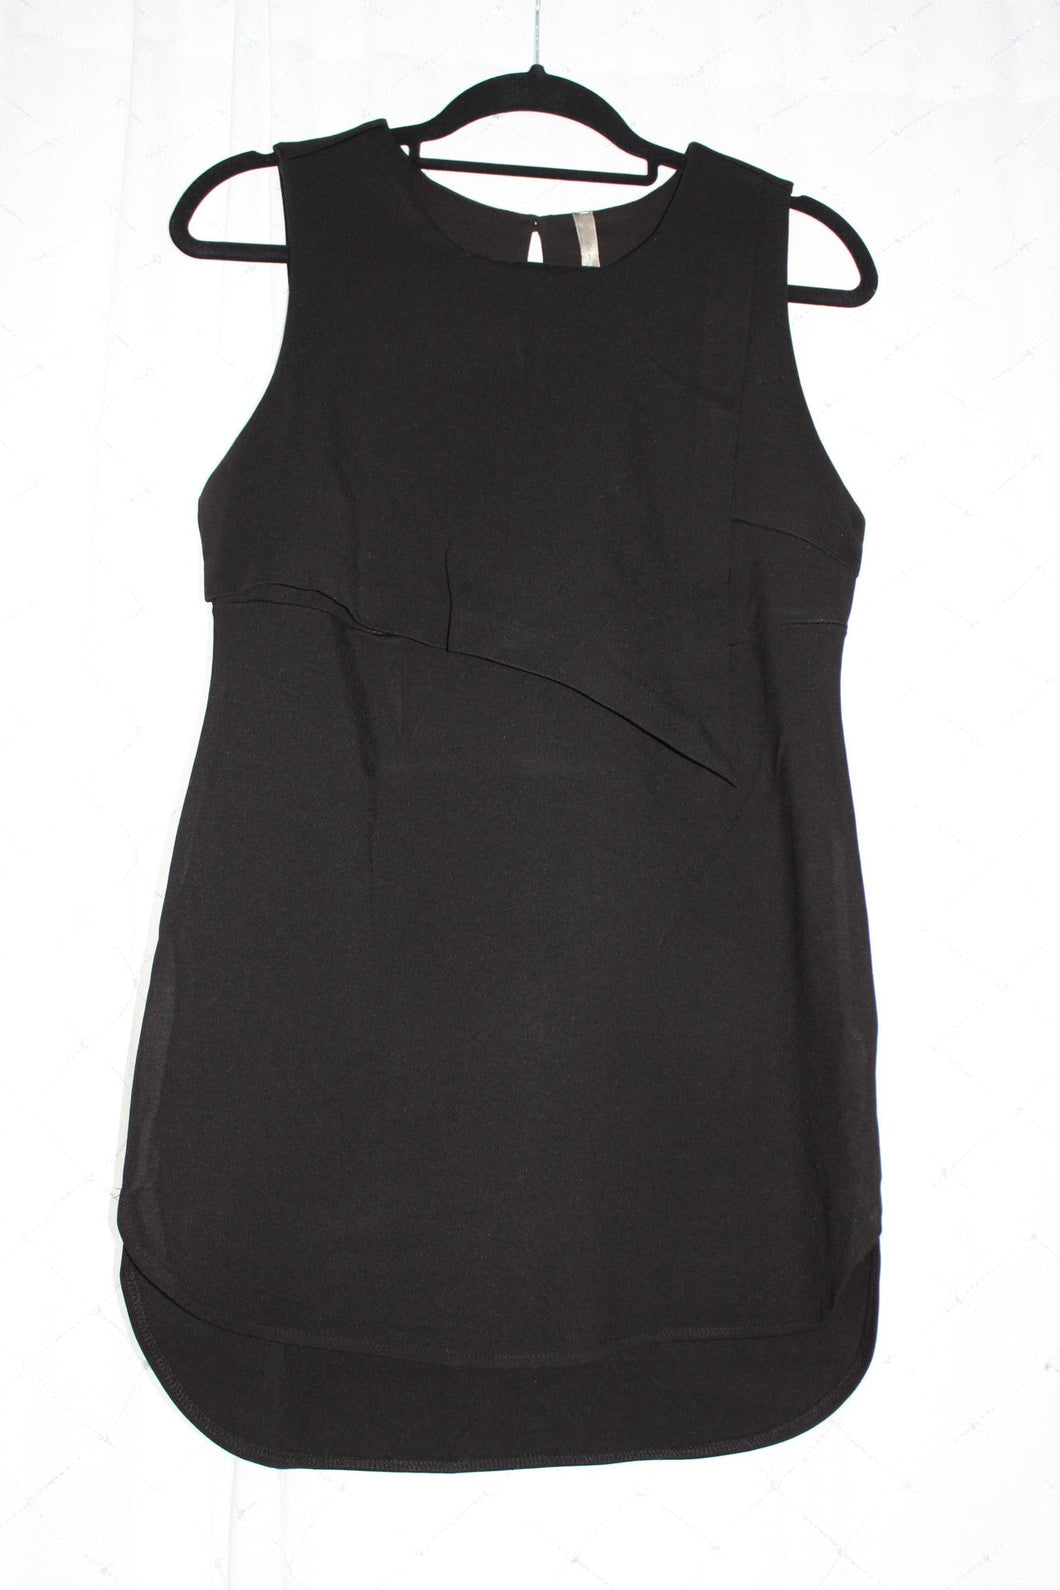 CLEARANCE S *New* Thyme Maternity Sleeveless black Top